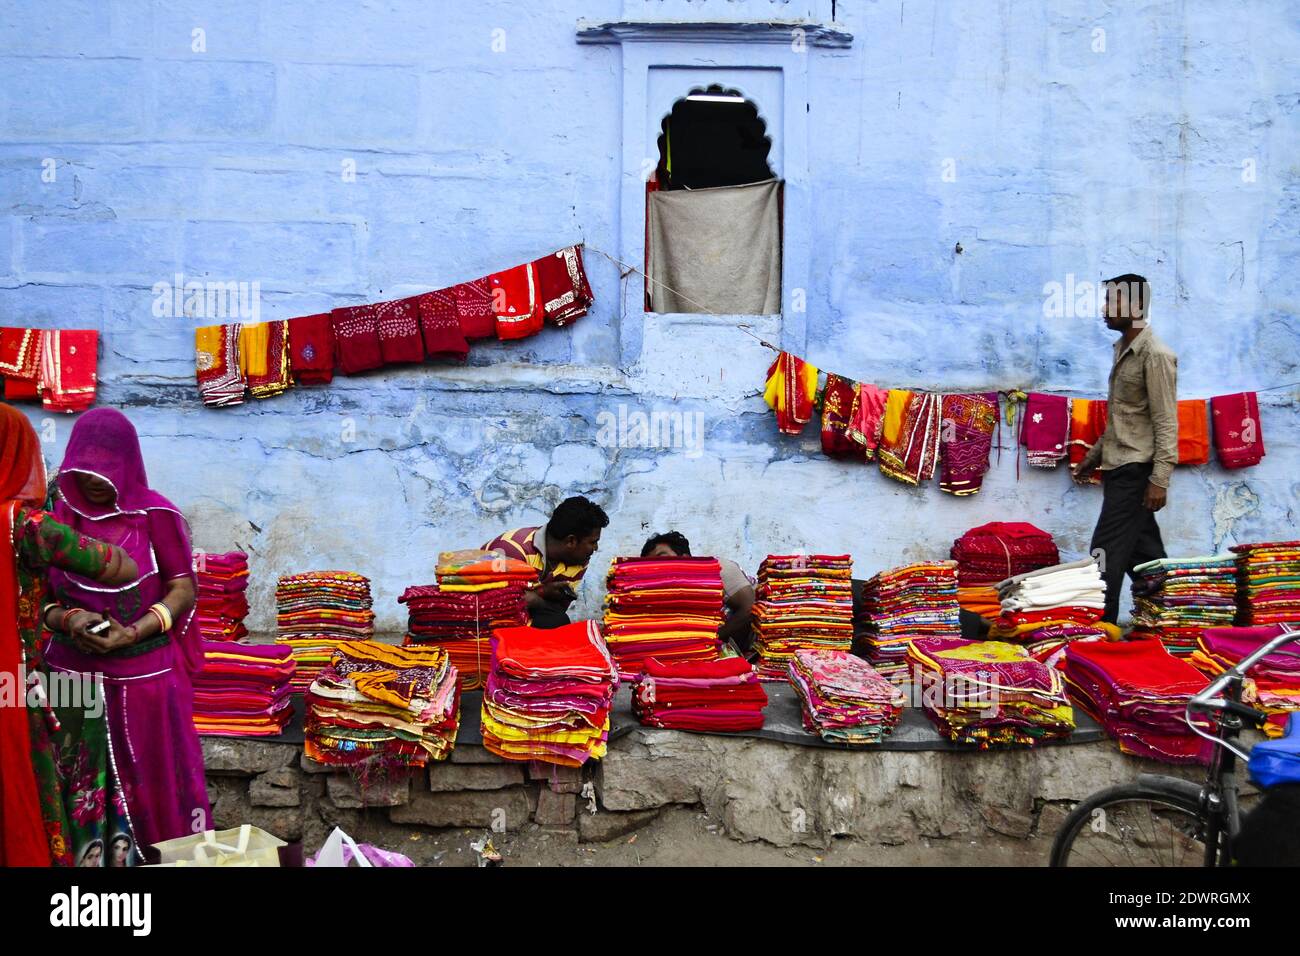 Jodhpur, Rajasthan, India - December, 2016: People selling sarees, colorful tissues and other fabric tissues and other Indian cloth on the street mark Stock Photo